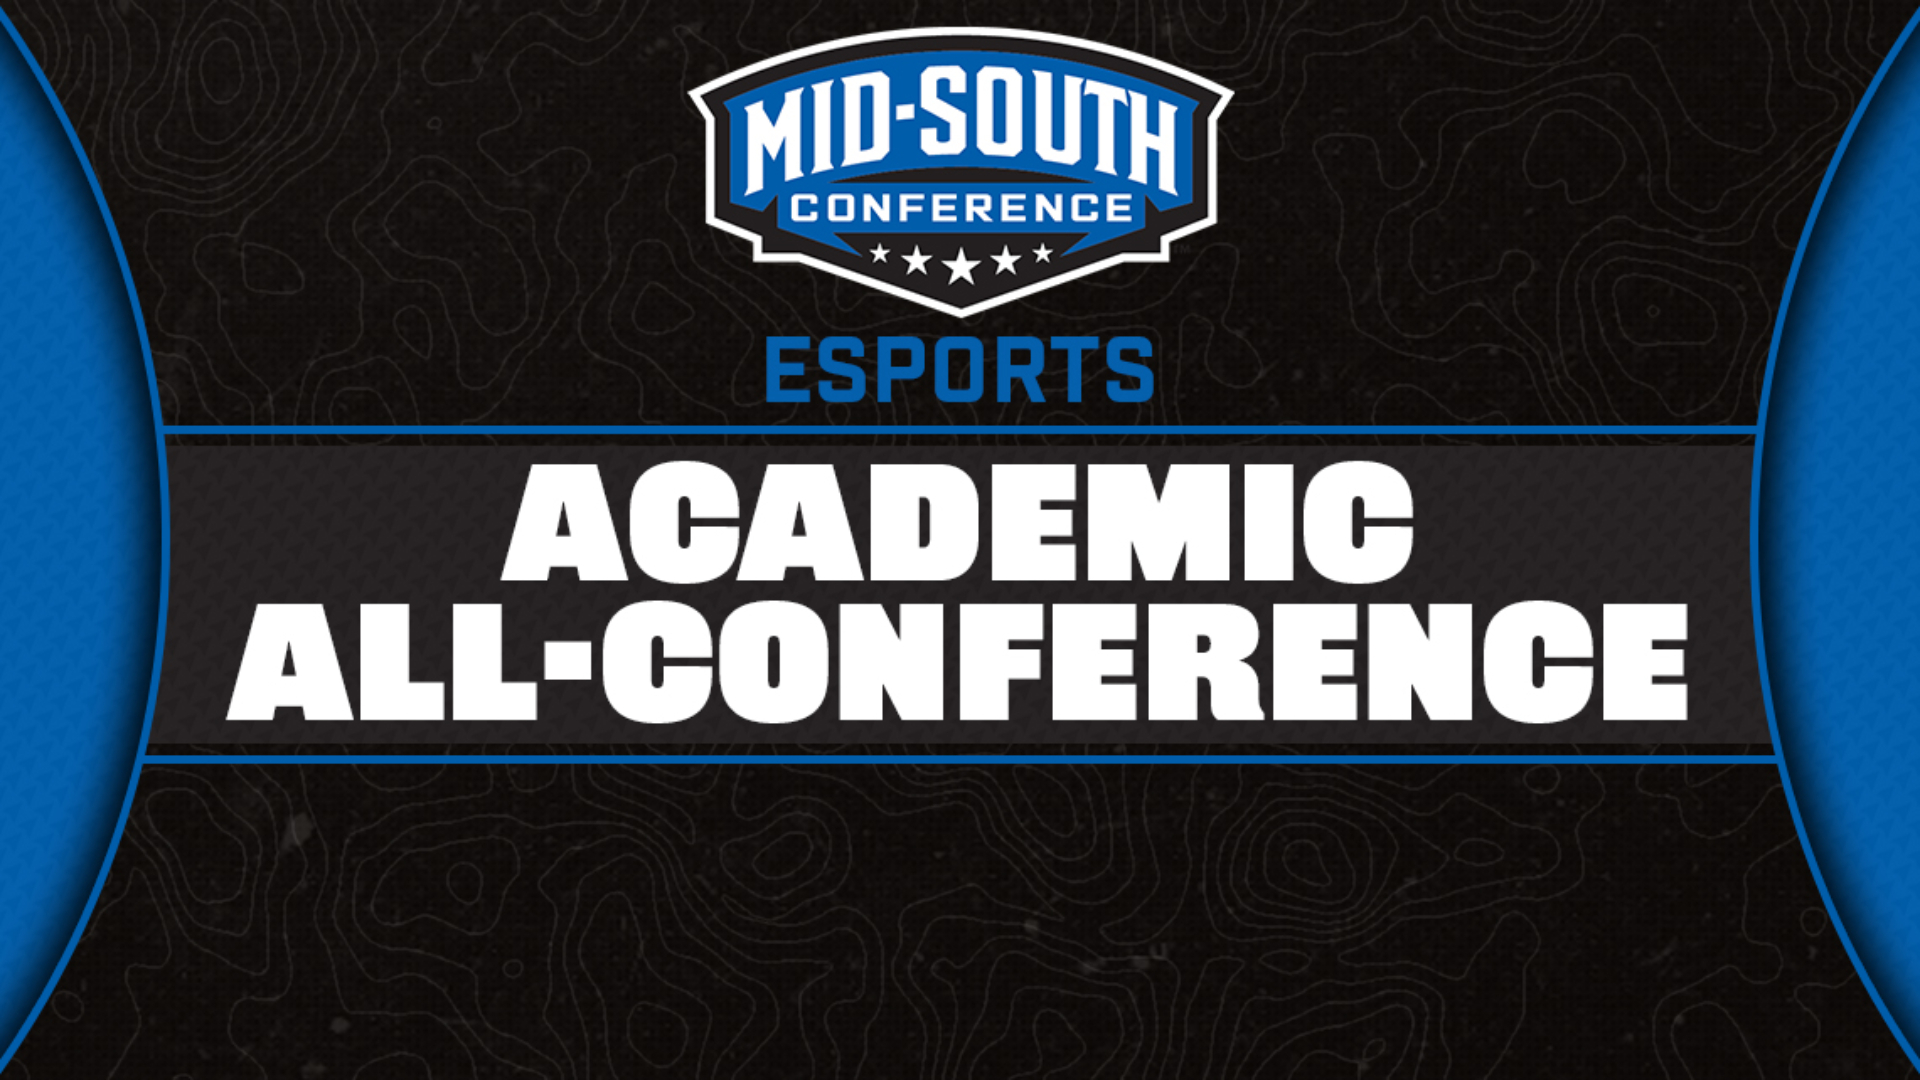 Mid-South Conference Announces Esports Academic Awards